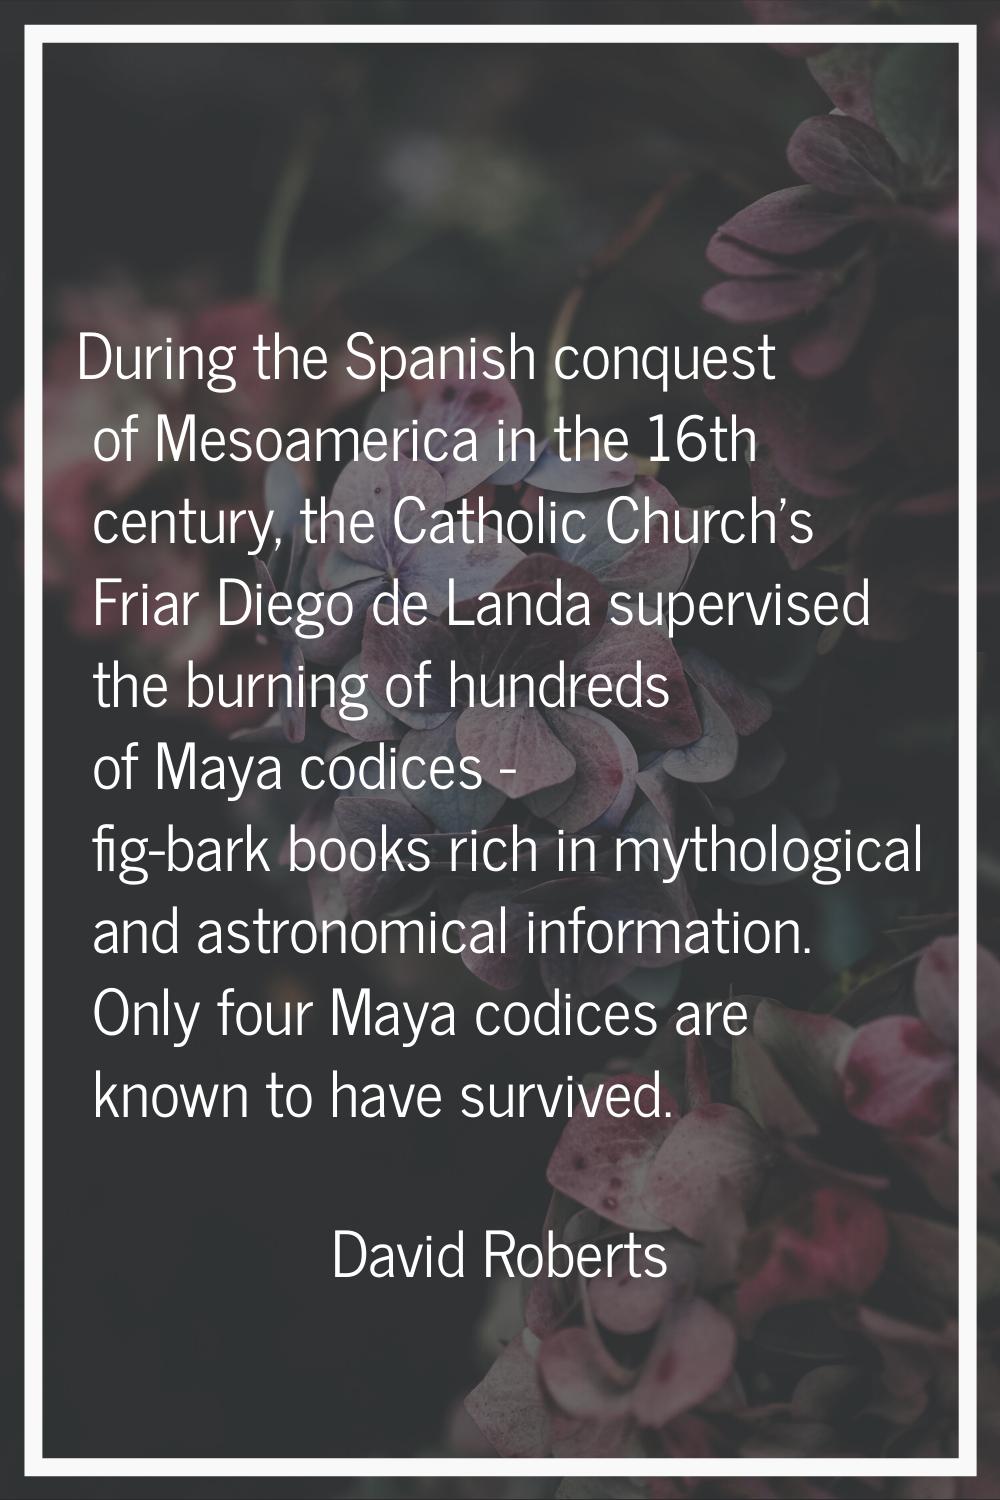 During the Spanish conquest of Mesoamerica in the 16th century, the Catholic Church's Friar Diego d